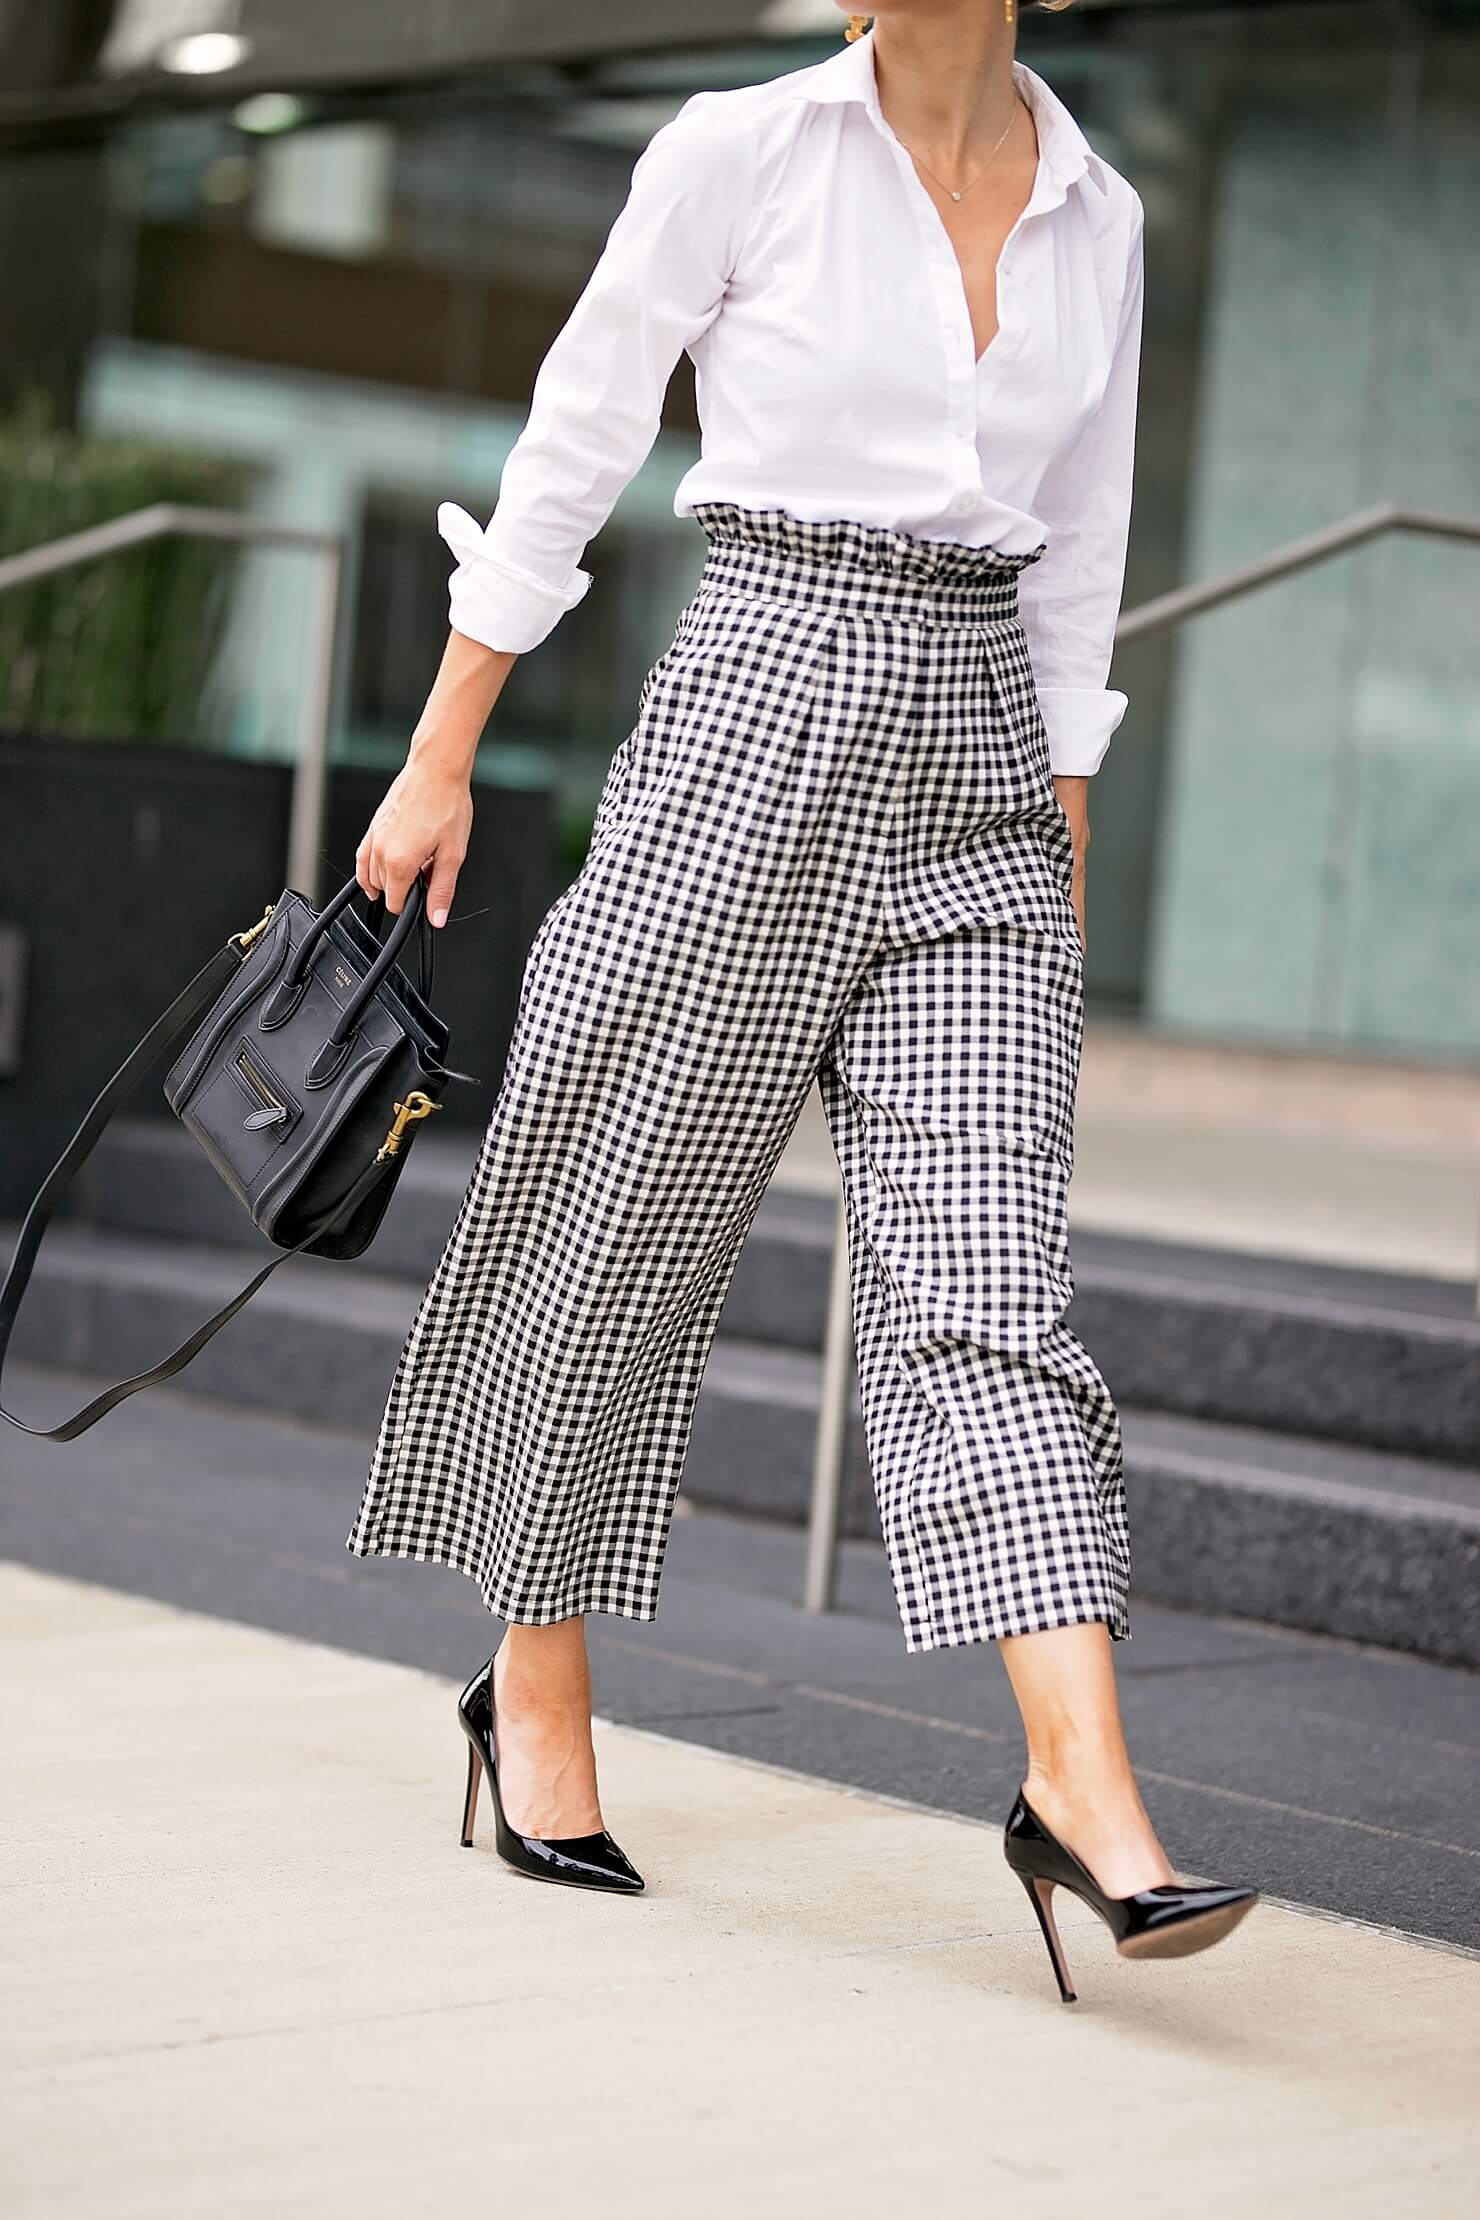 brightoabest business podcastsn keller wearing gingham pants with white button down and black pointy toe pumps